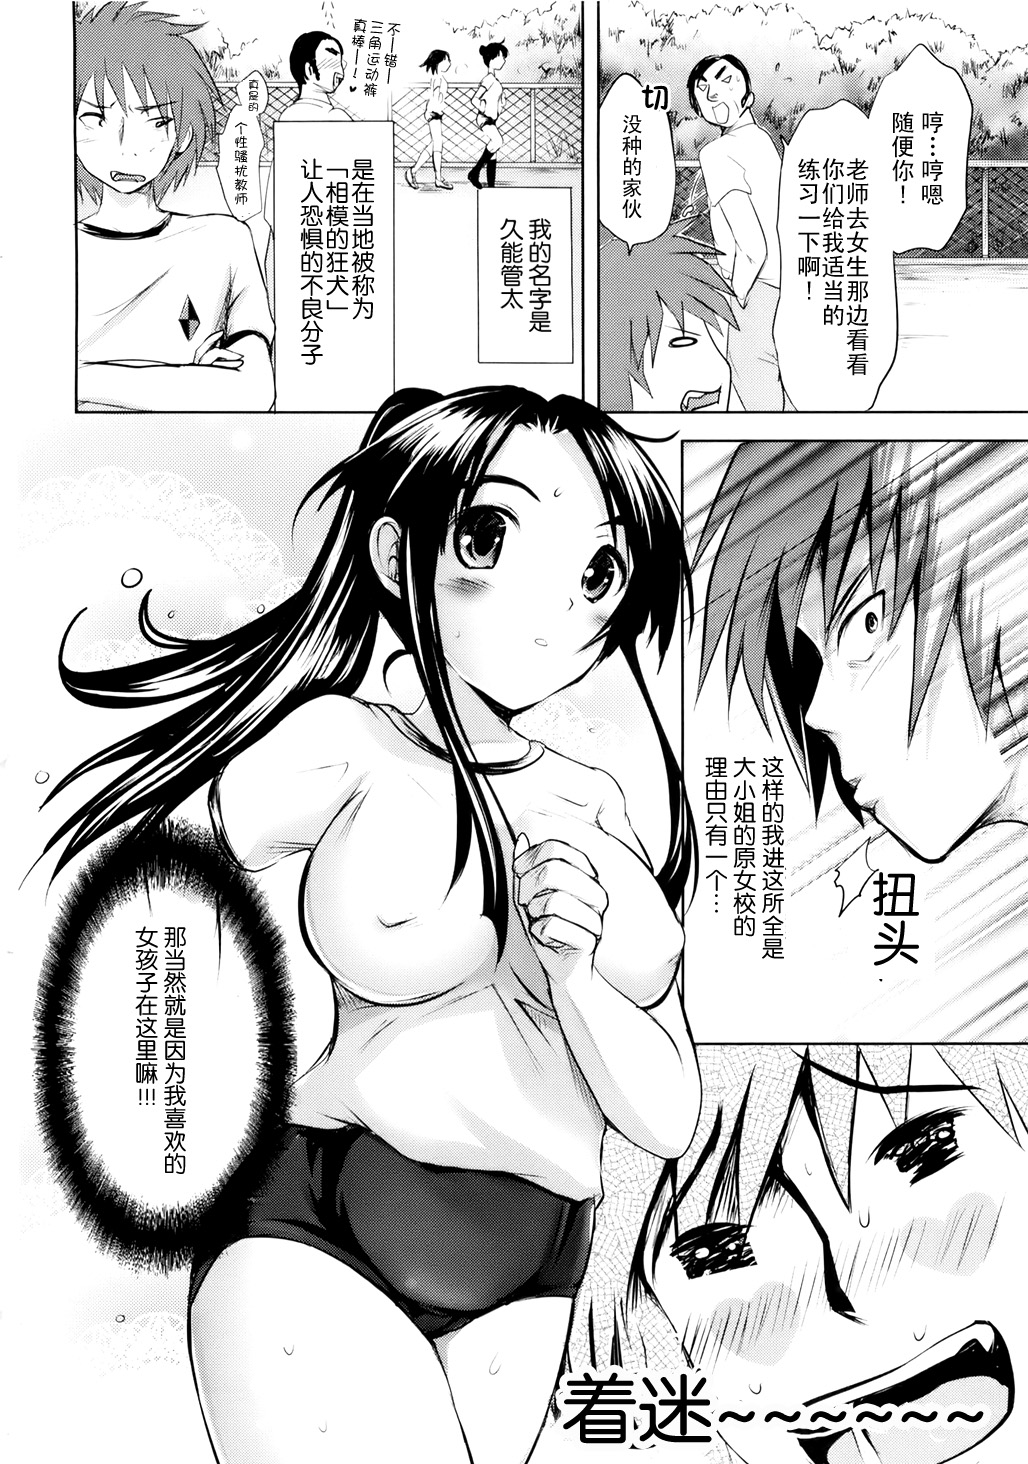 [Natsume Fumika] Sundere! Ch. 3 [Chinese] [夏目文花] スンデレ! 章3 [中文翻譯]